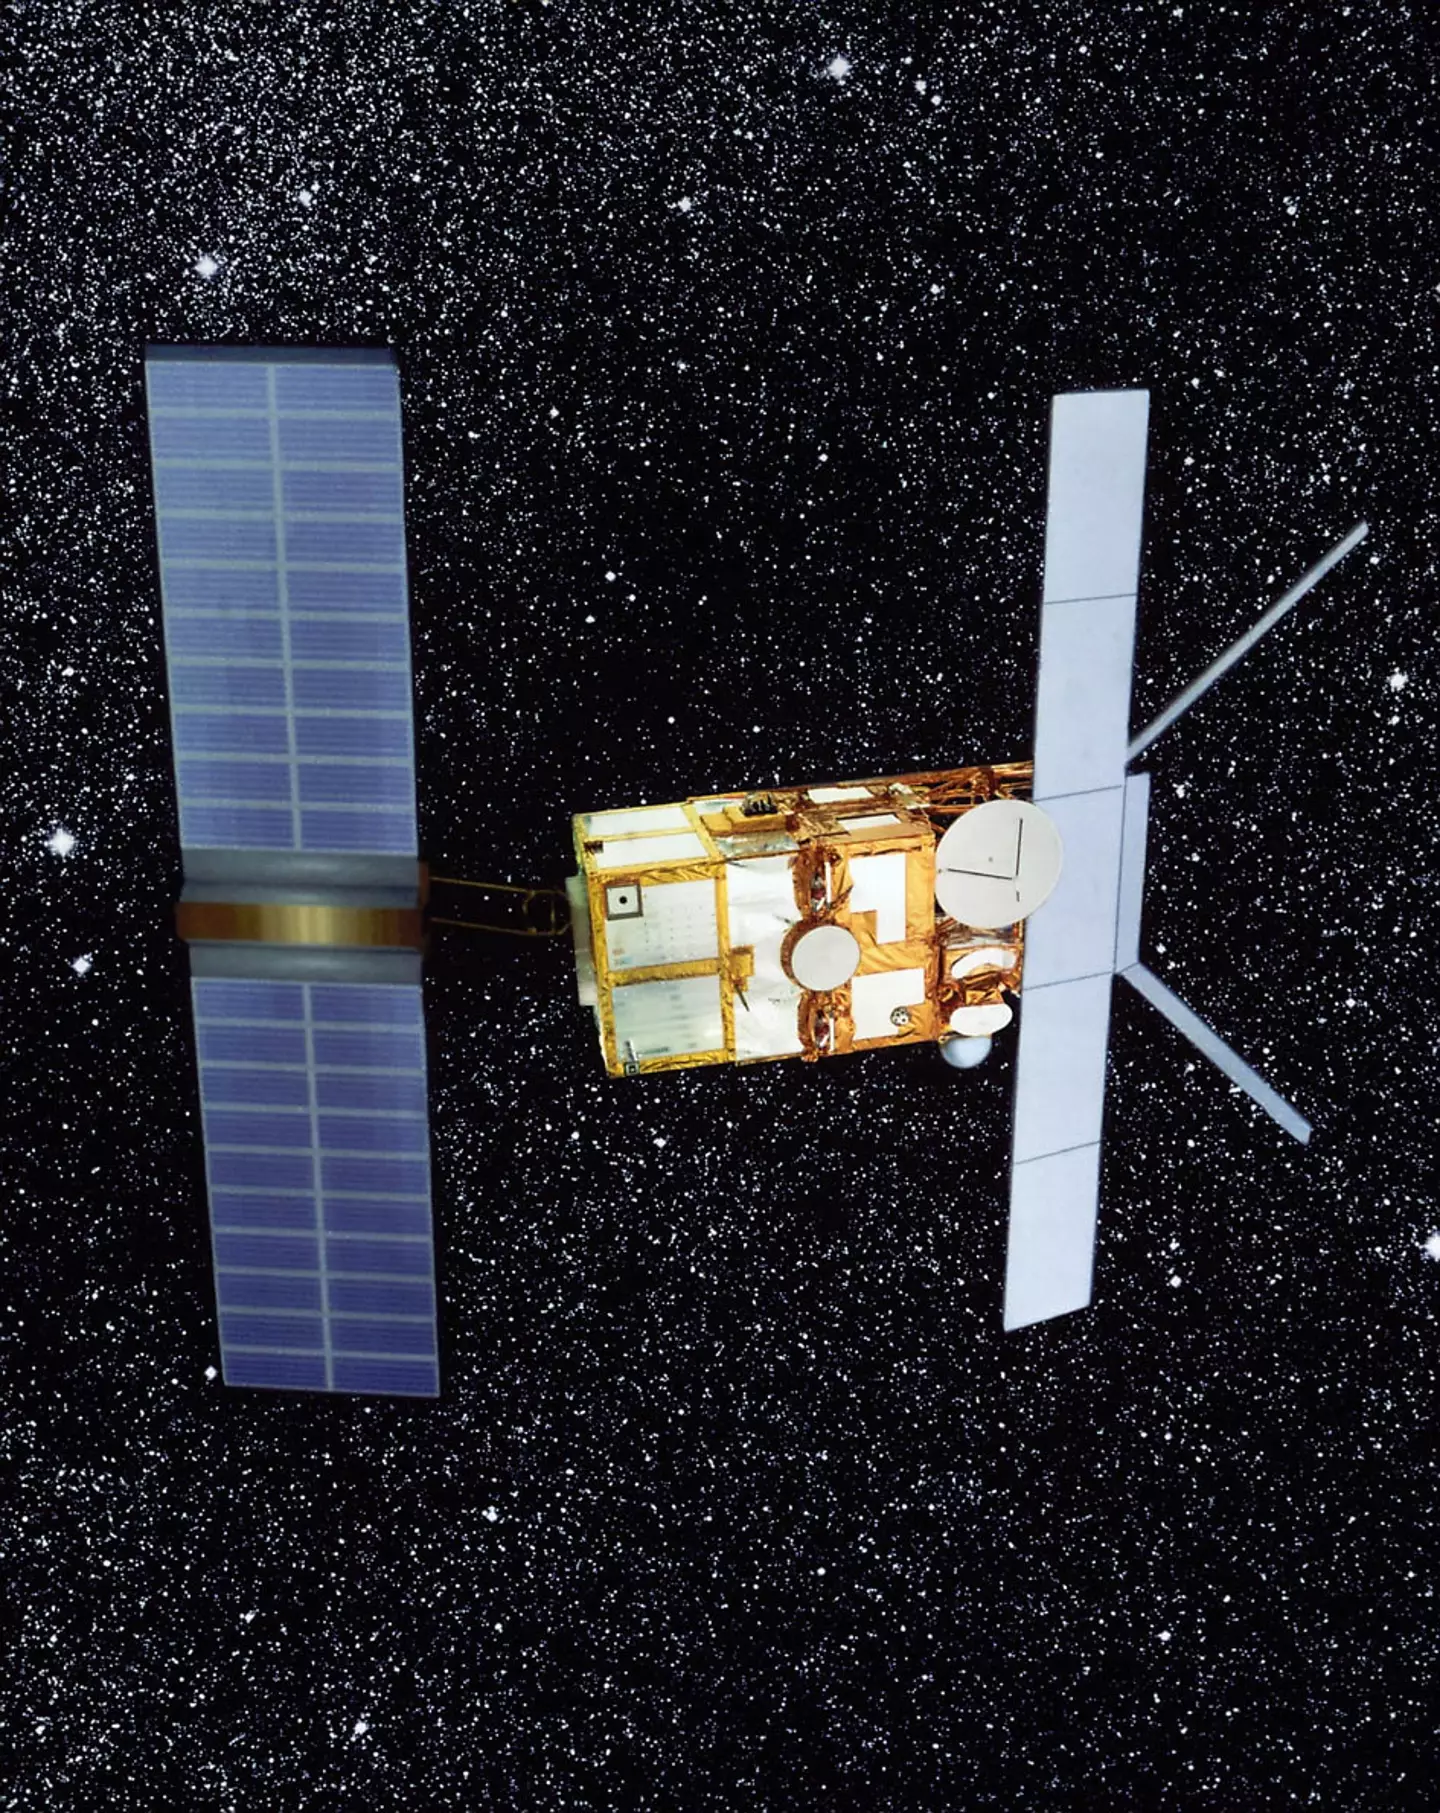 The European Remote Sensing 2 (ERS-2) satellite was sent up in the 1990s.